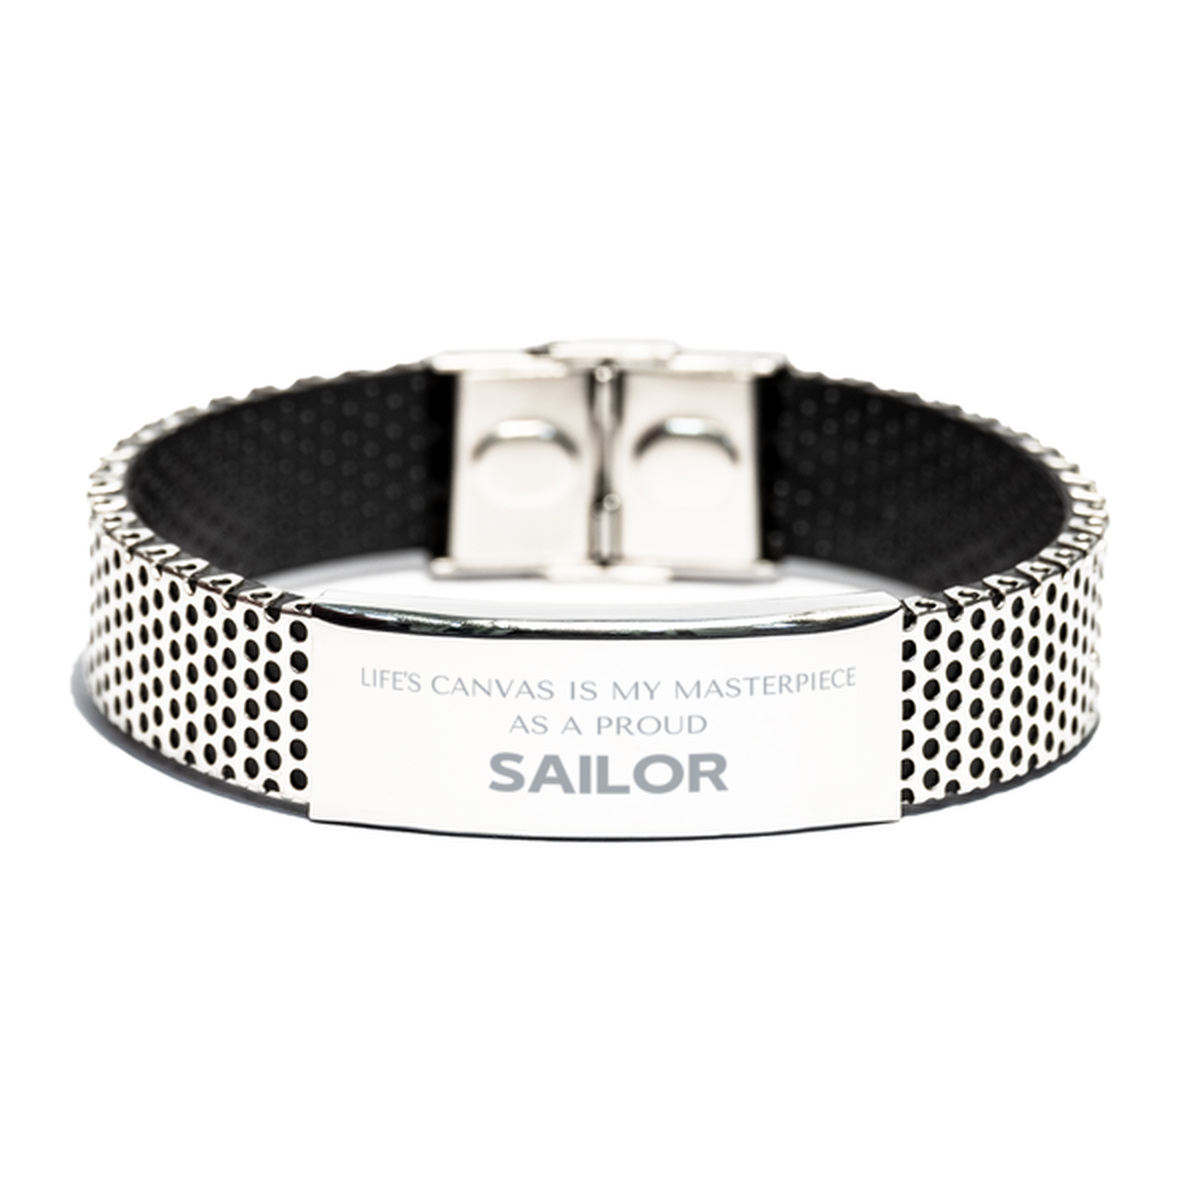 Proud Sailor Gifts, Life's canvas is my masterpiece, Epic Birthday Christmas Unique Stainless Steel Bracelet For Sailor, Coworkers, Men, Women, Friends